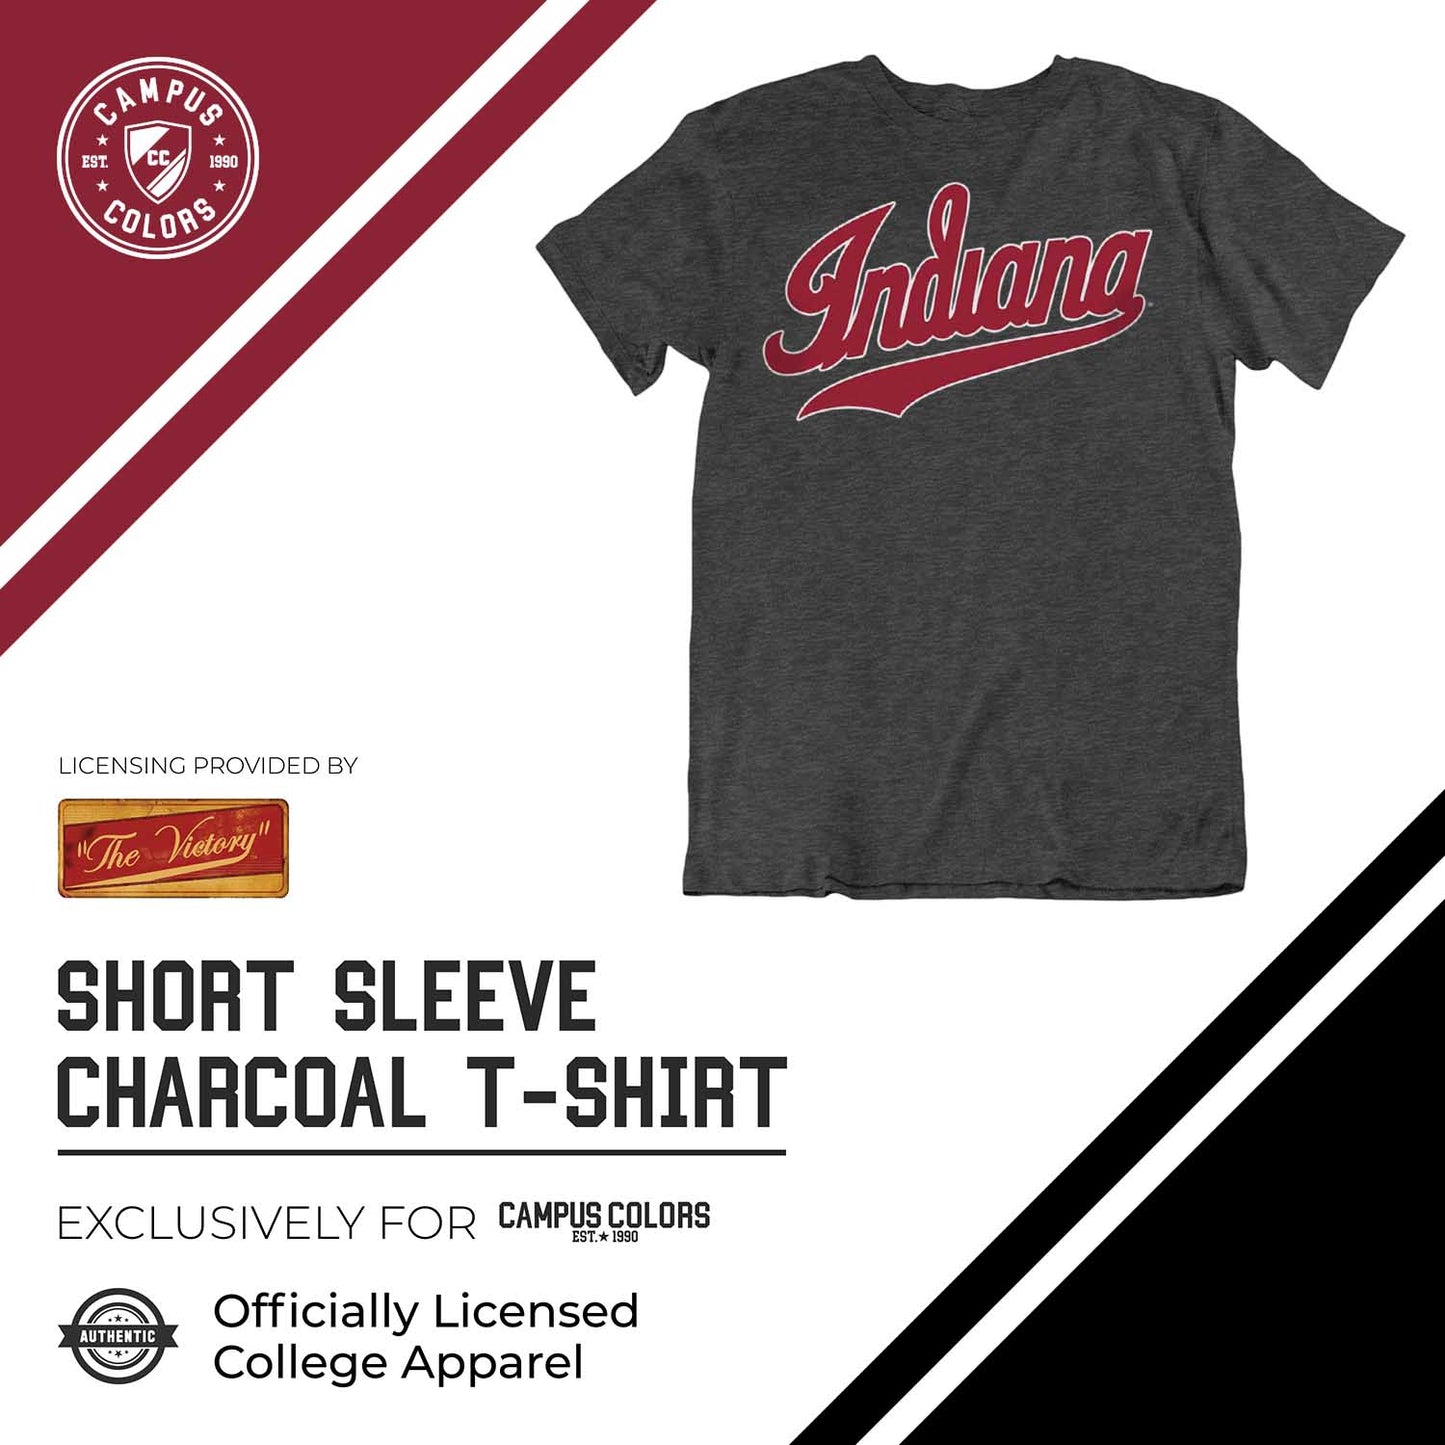 Indiana Hoosiers Campus Colors NCAA Adult Cotton Blend Charcoal Tagless T-Shirt - Charcoal